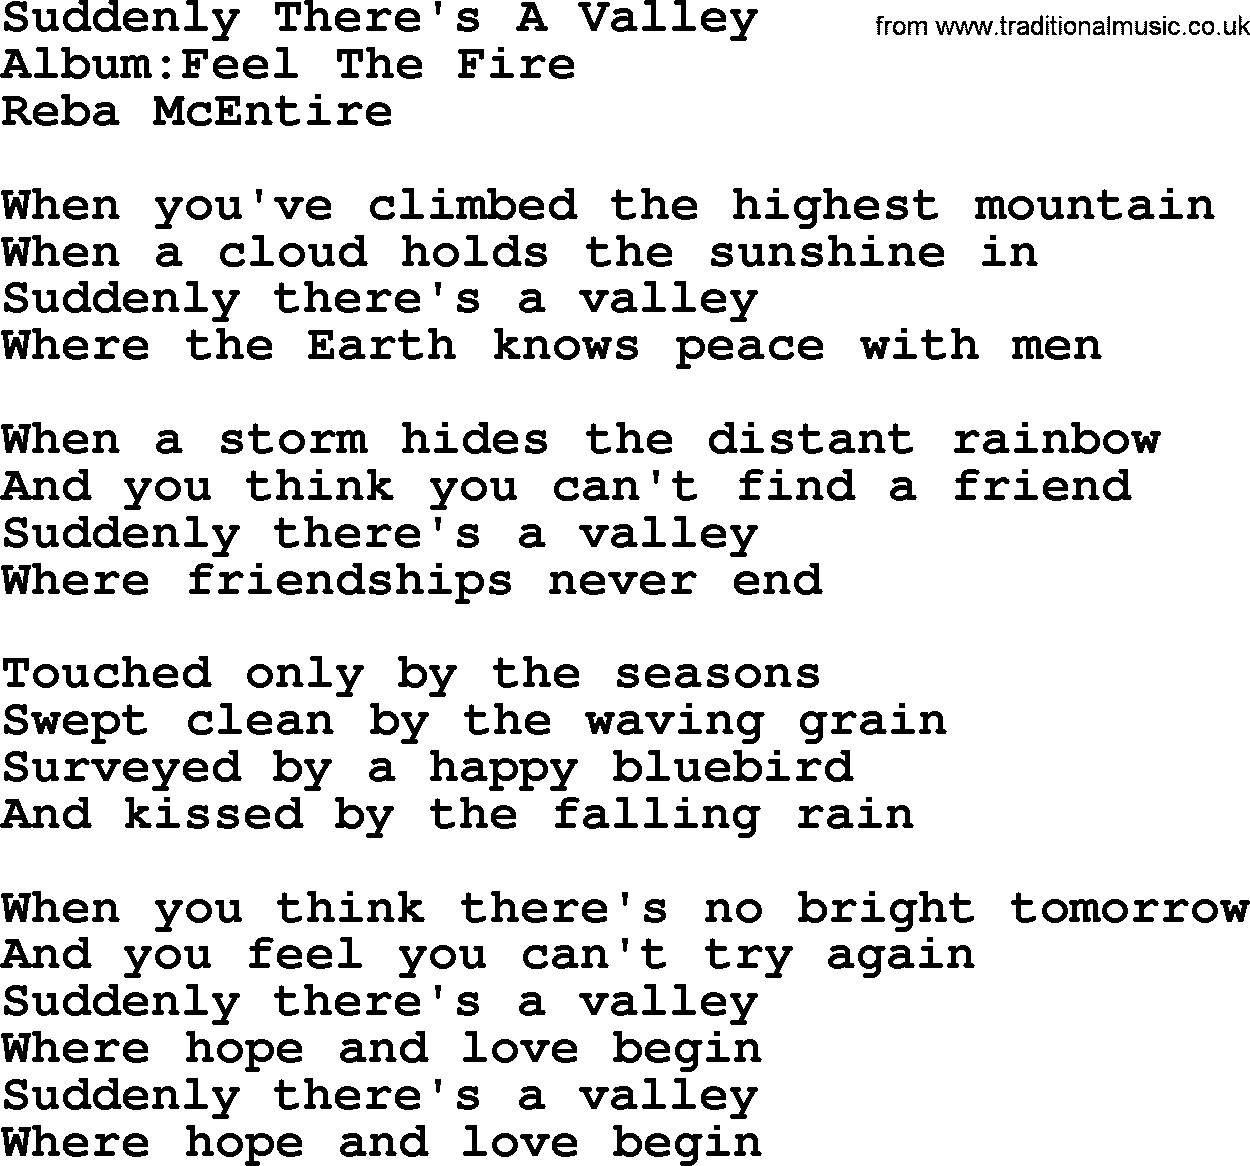 Reba McEntire song: Suddenly There's A Valley lyrics